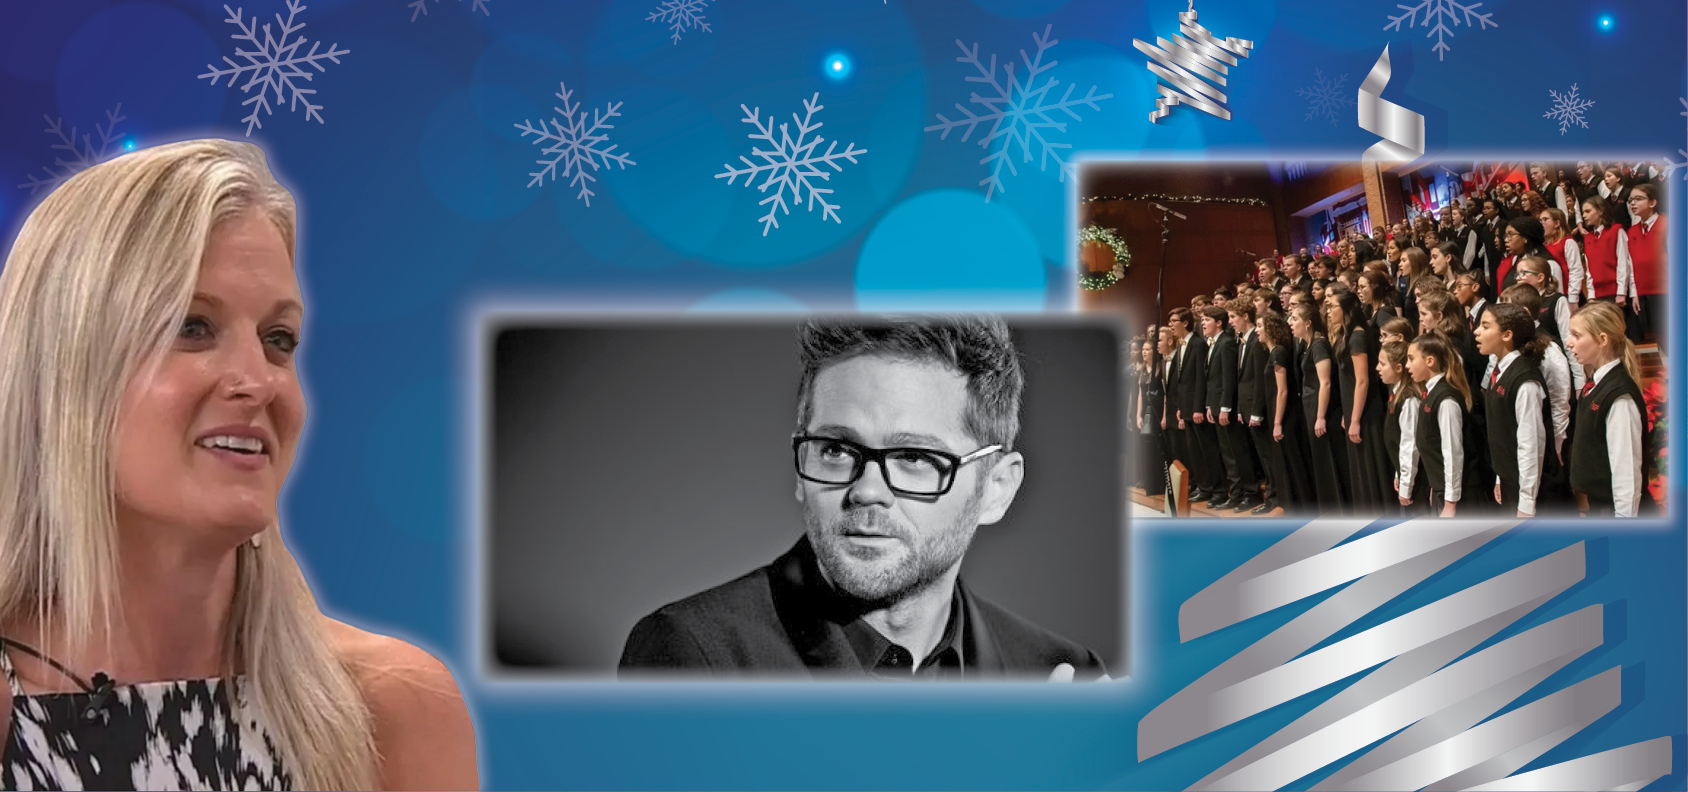 Collage of Josh Kaufman, Leah Crane, and the Indianapolis Children’s Choir against a background of snowflakes.